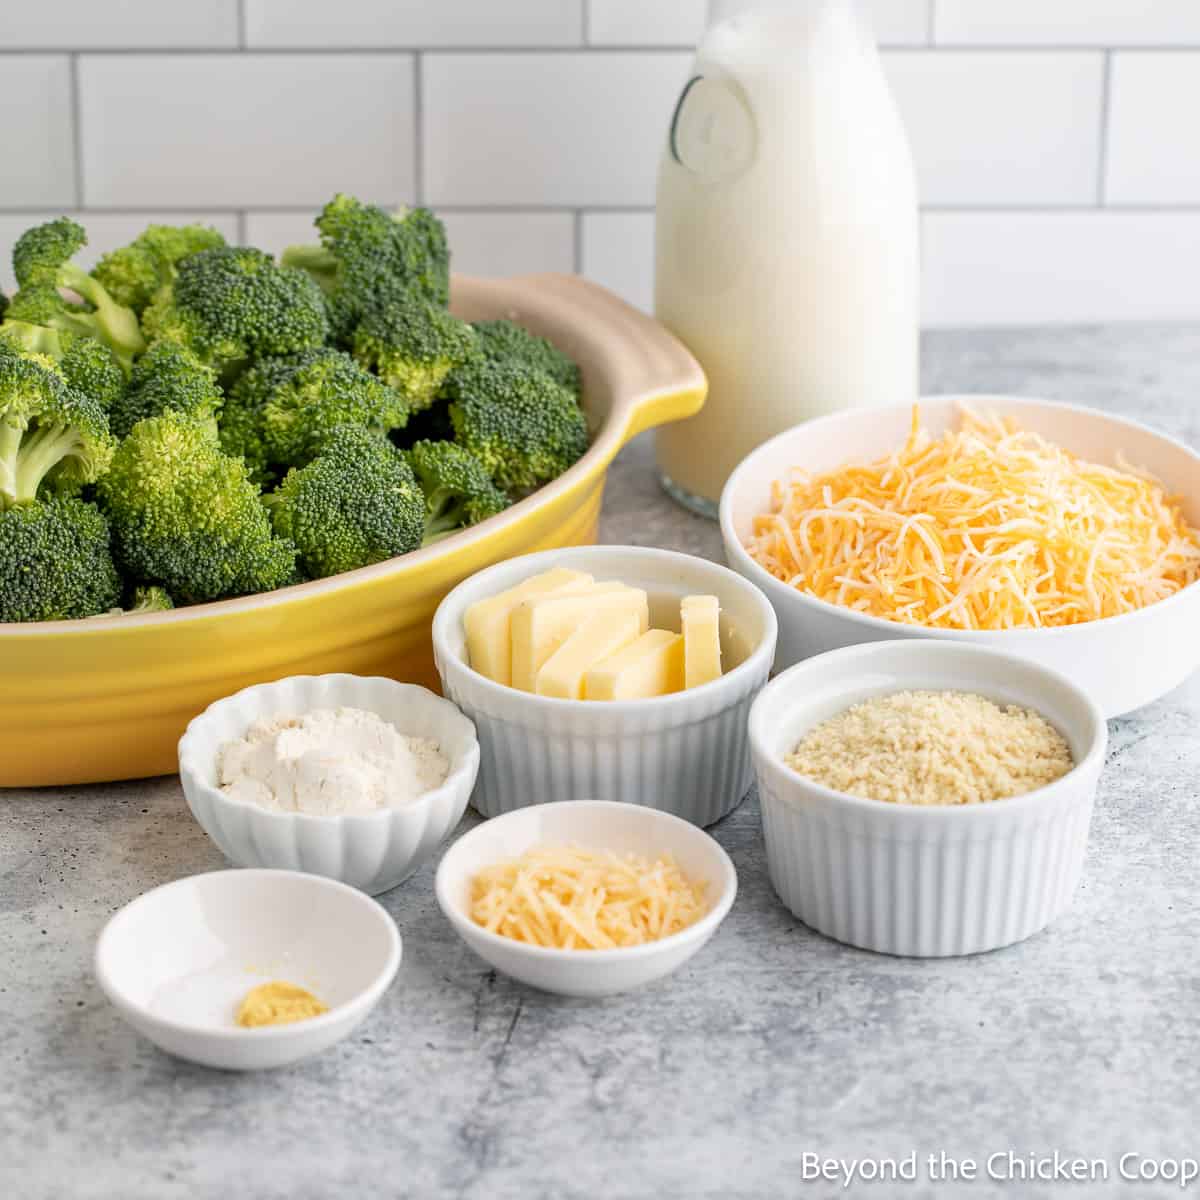 Broccoli, cheese, milk and other ingredients in small bowls. 